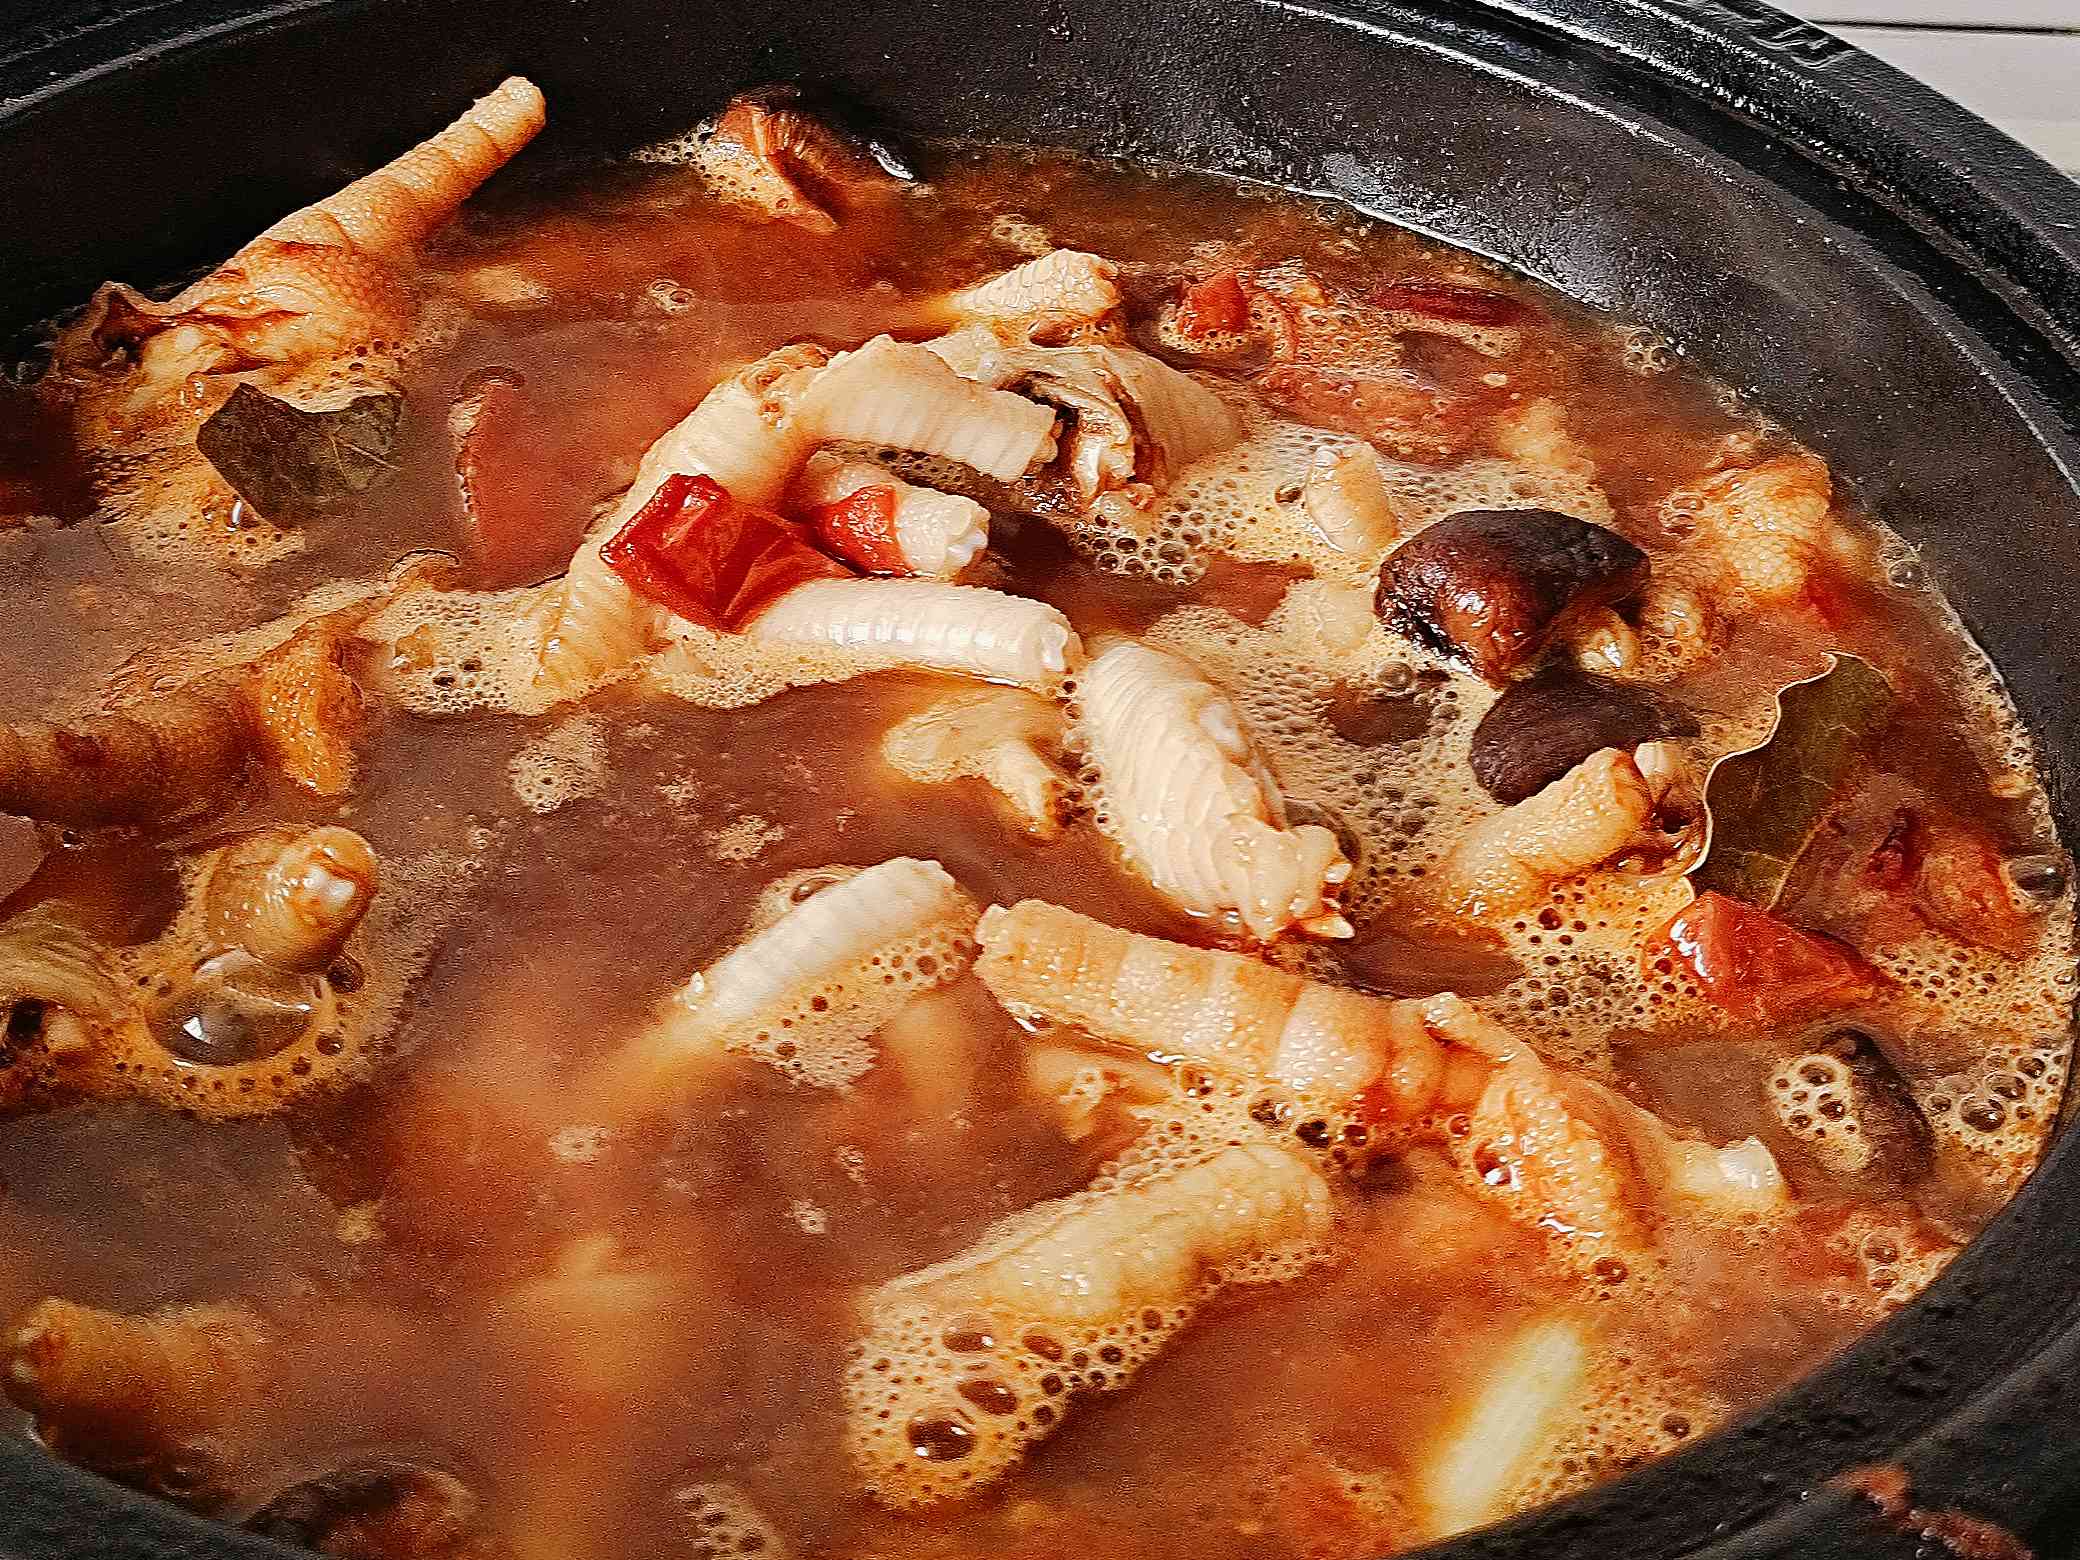 Do this Chicken Feet in Autumn and Winter, One Pot is Not Enough to Eat ~ Tomato Potato Chicken recipe